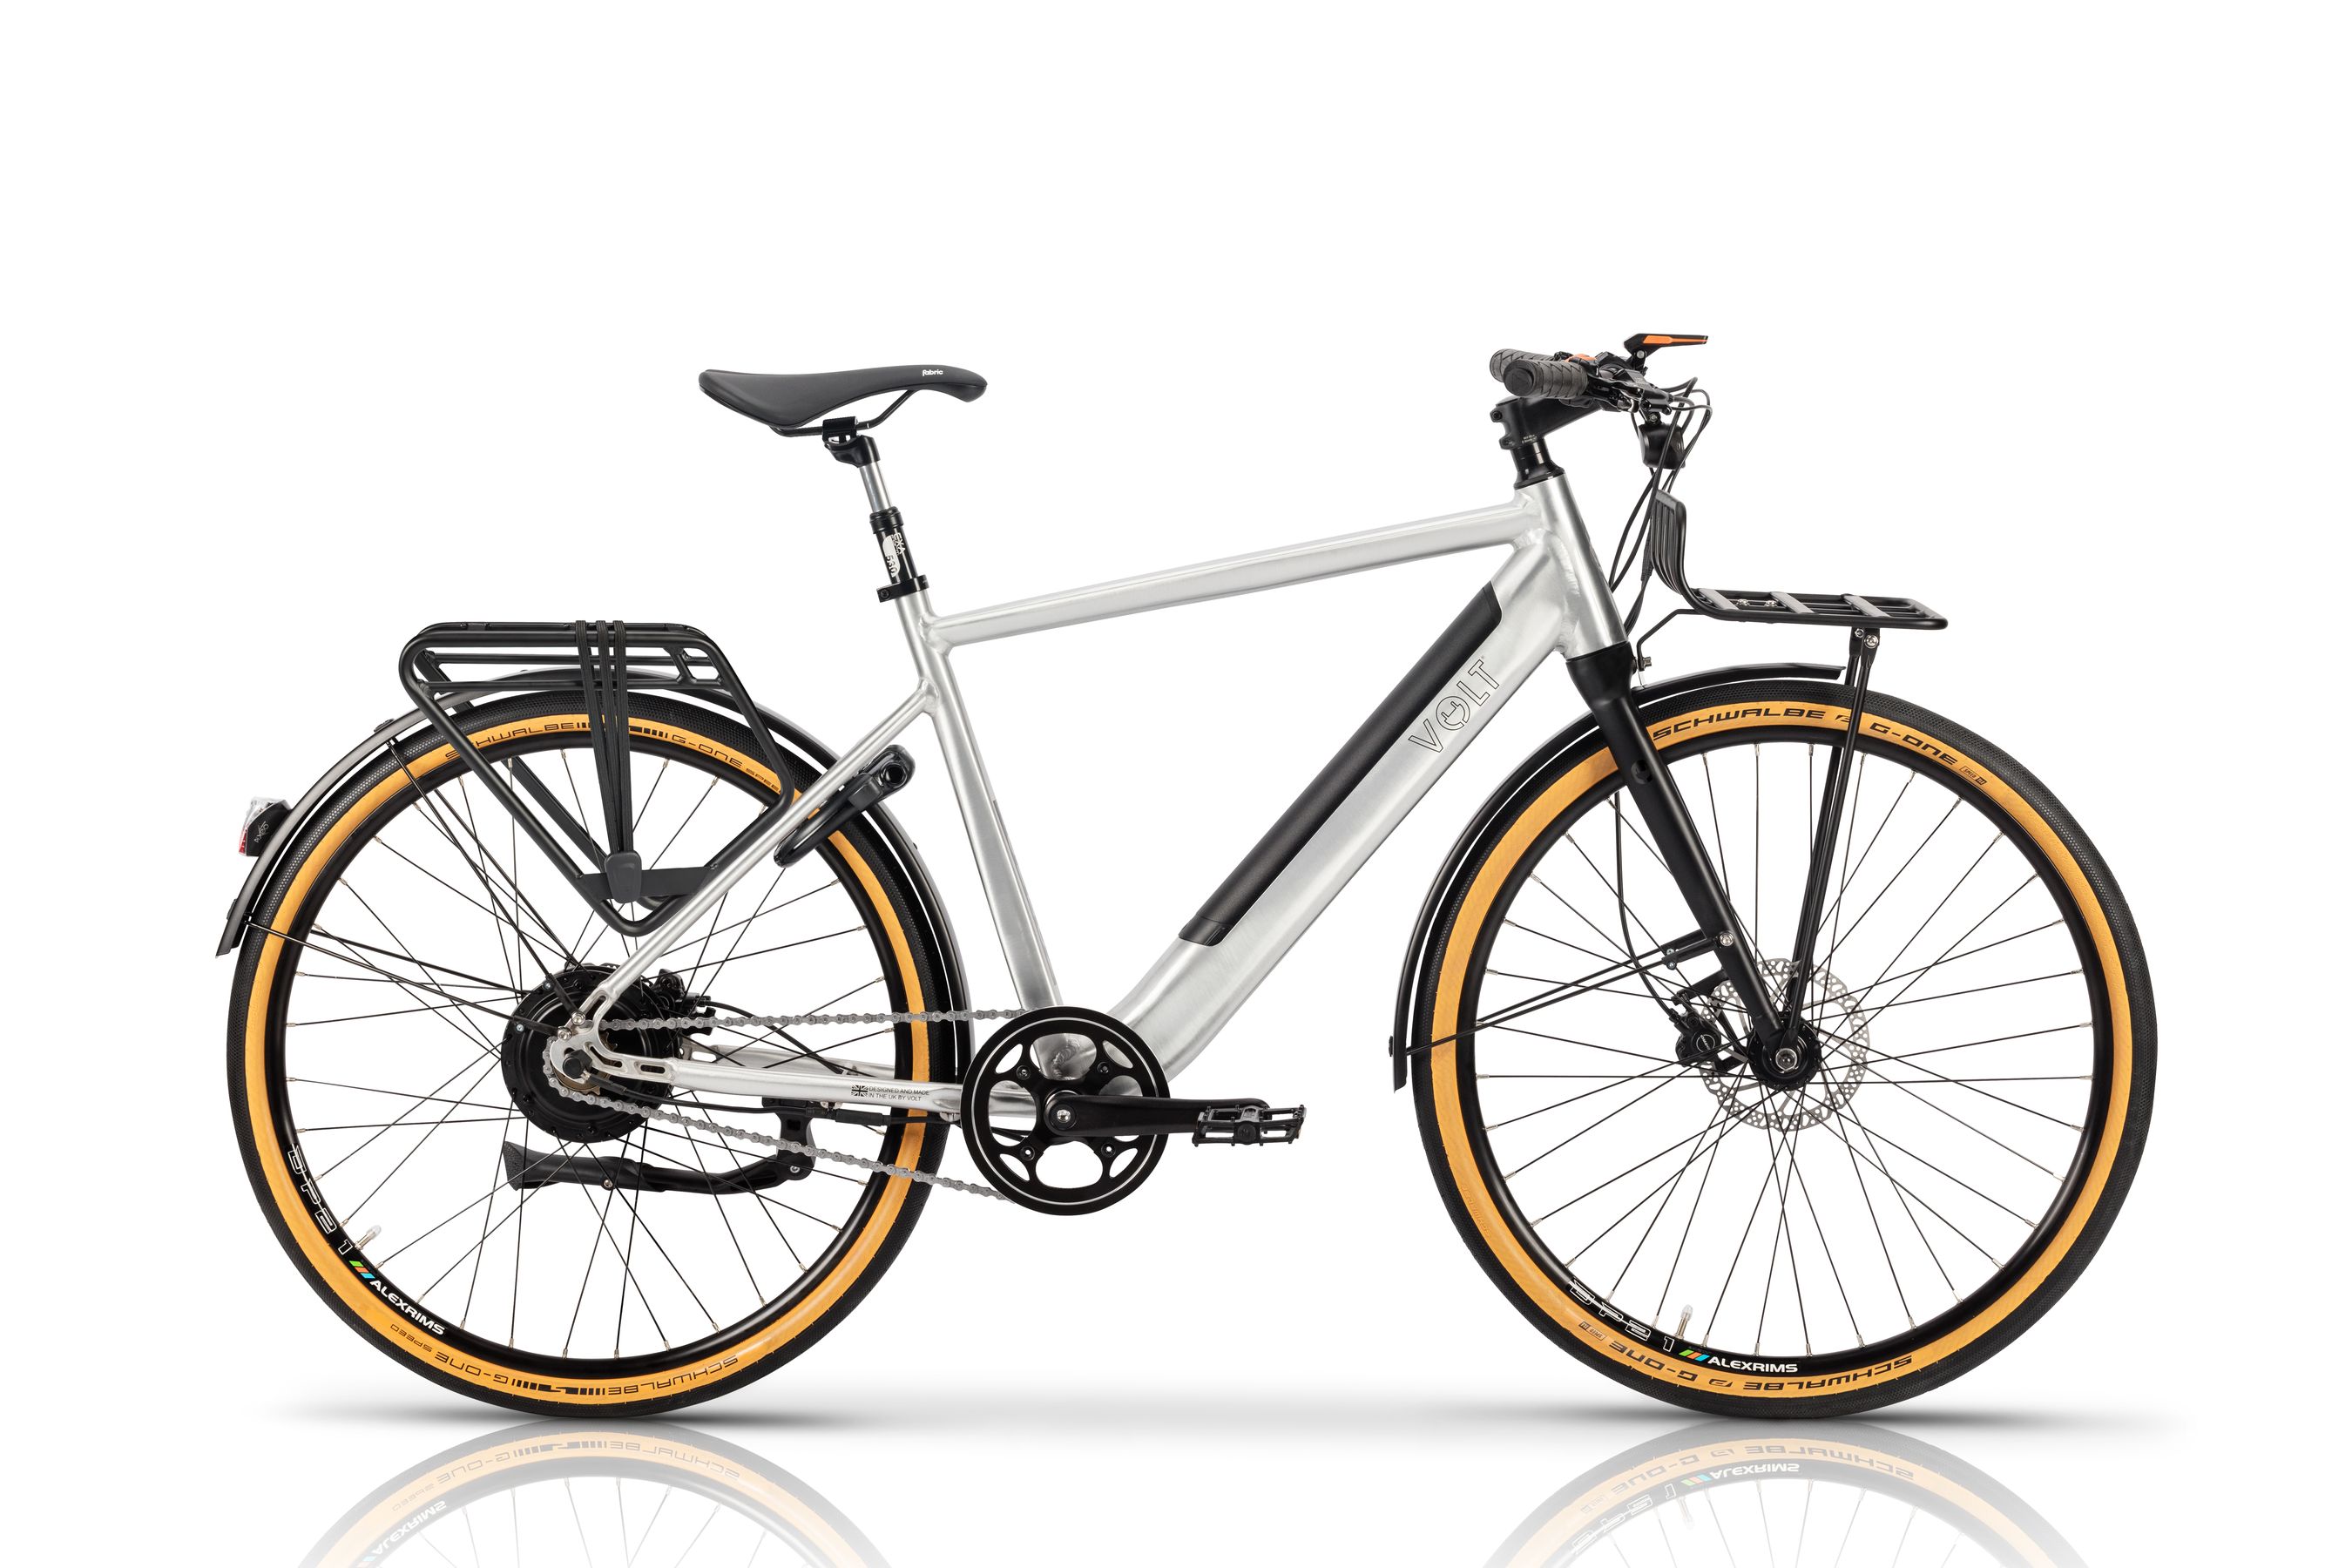 Volt London Urban E-bike with back rack straight studio photograph side on with a white background